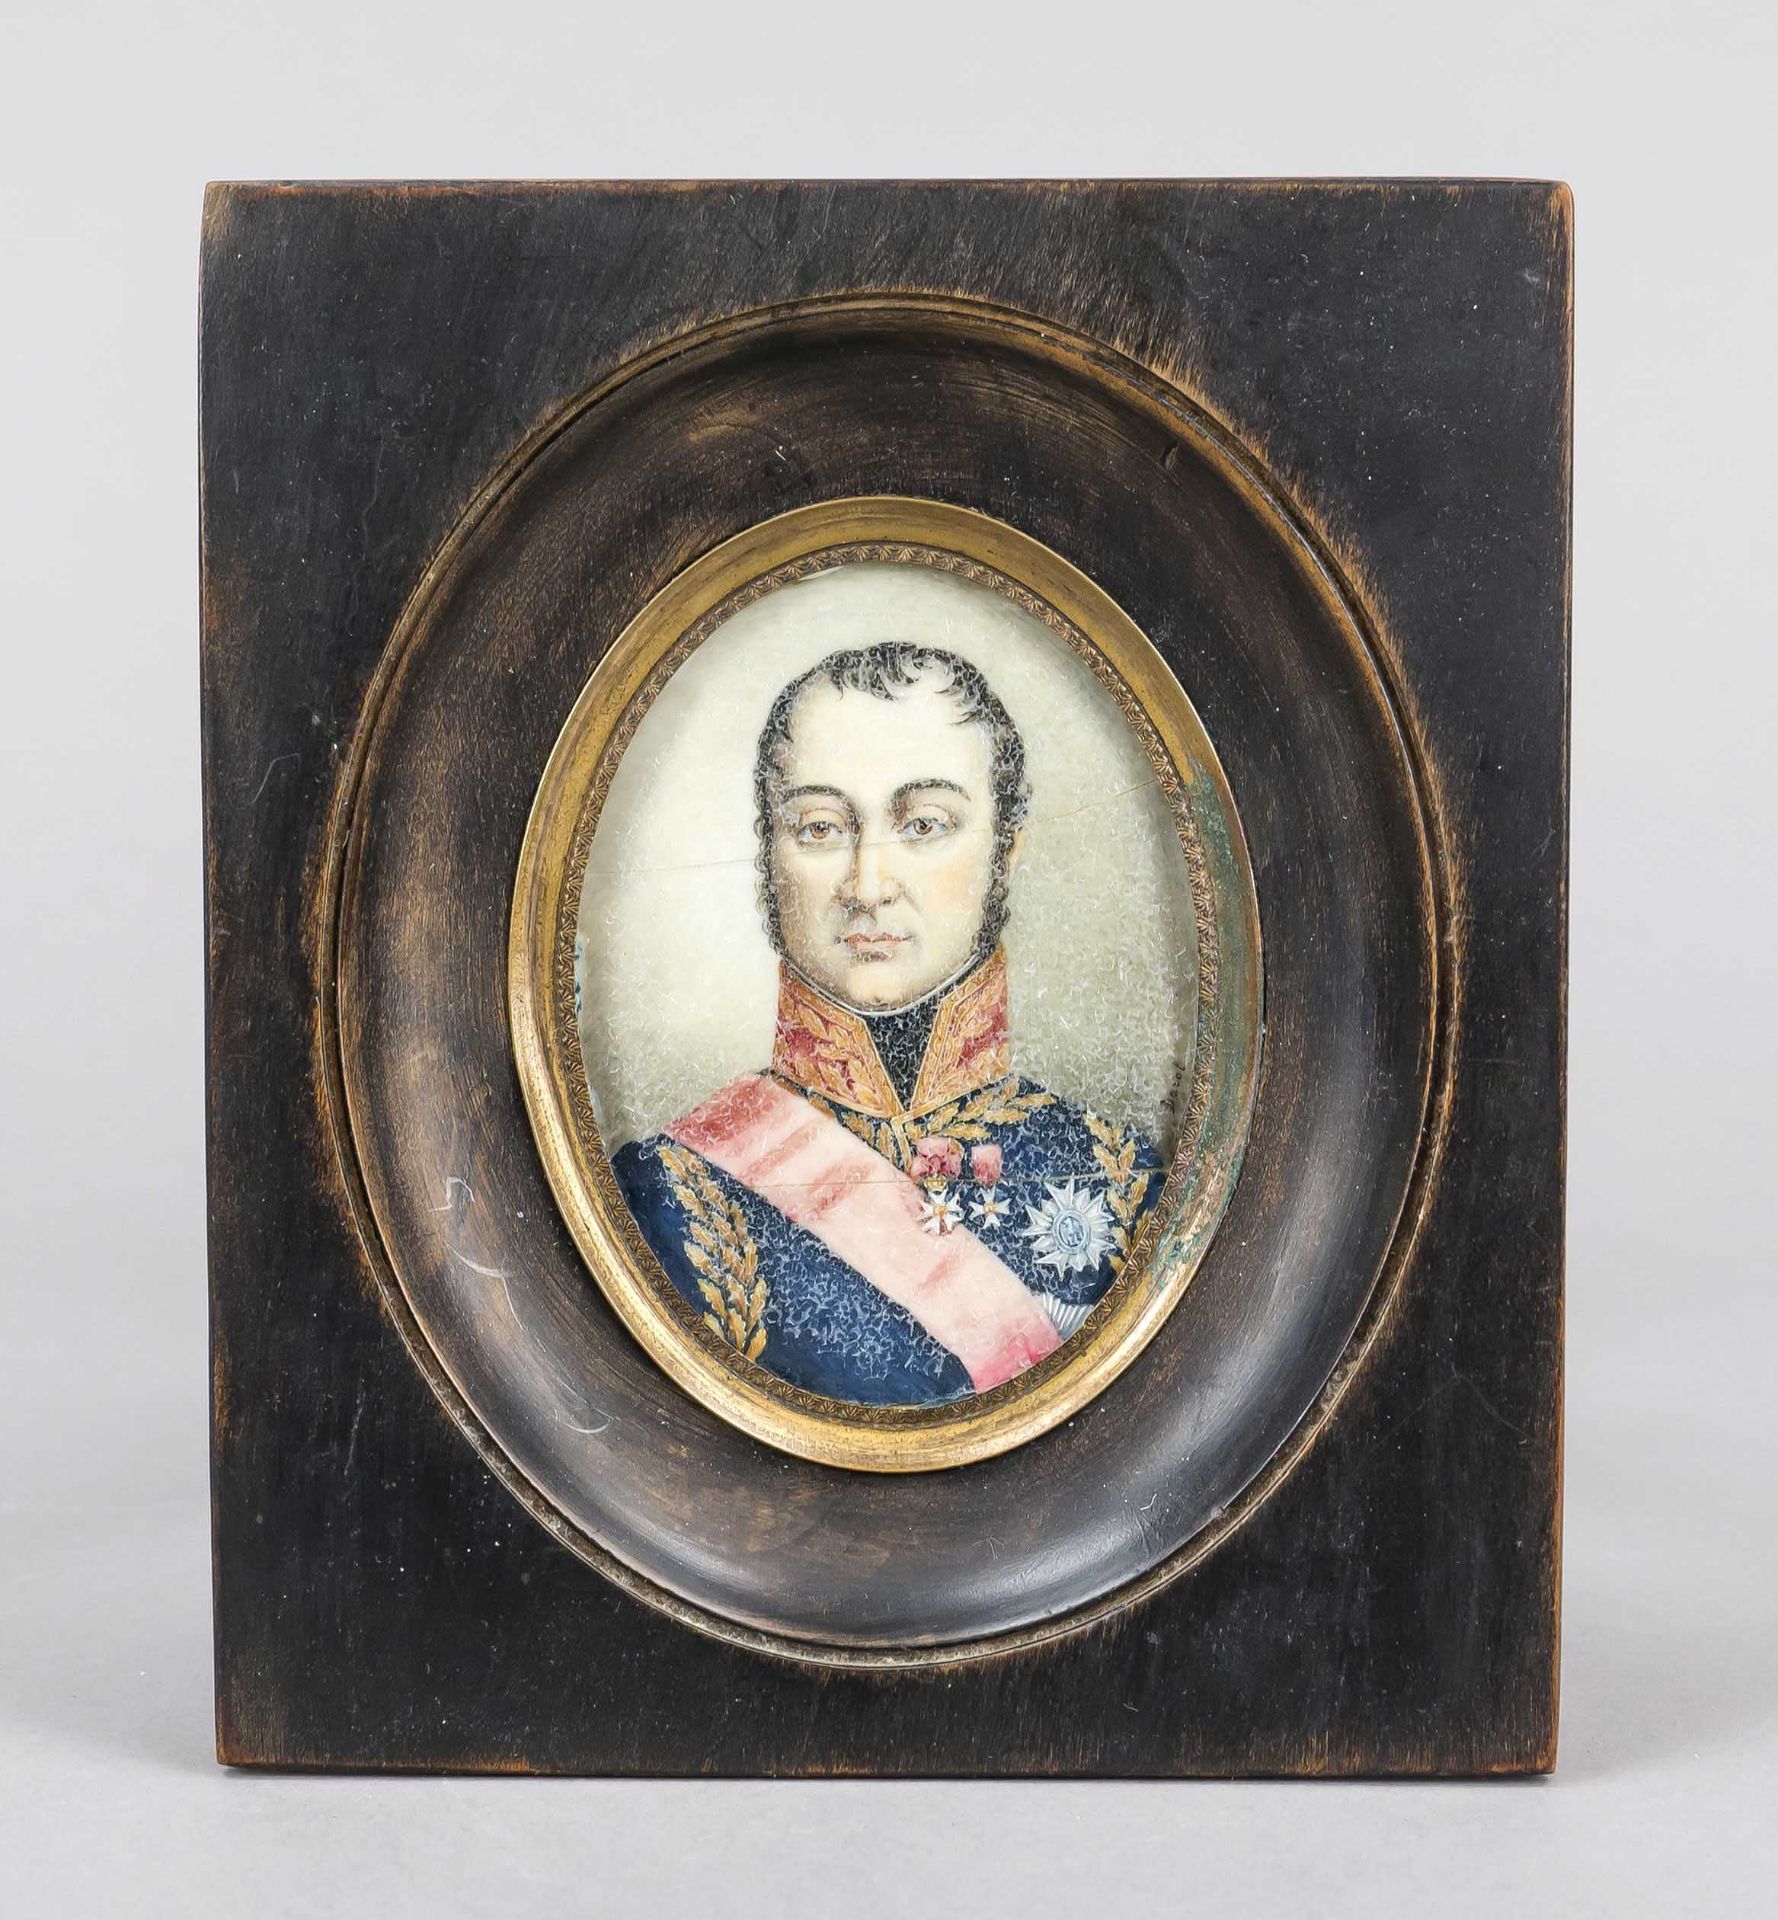 Oval miniature, French, 19th century, polychrome tempera painting on bone plate. Marshal Oudinot (